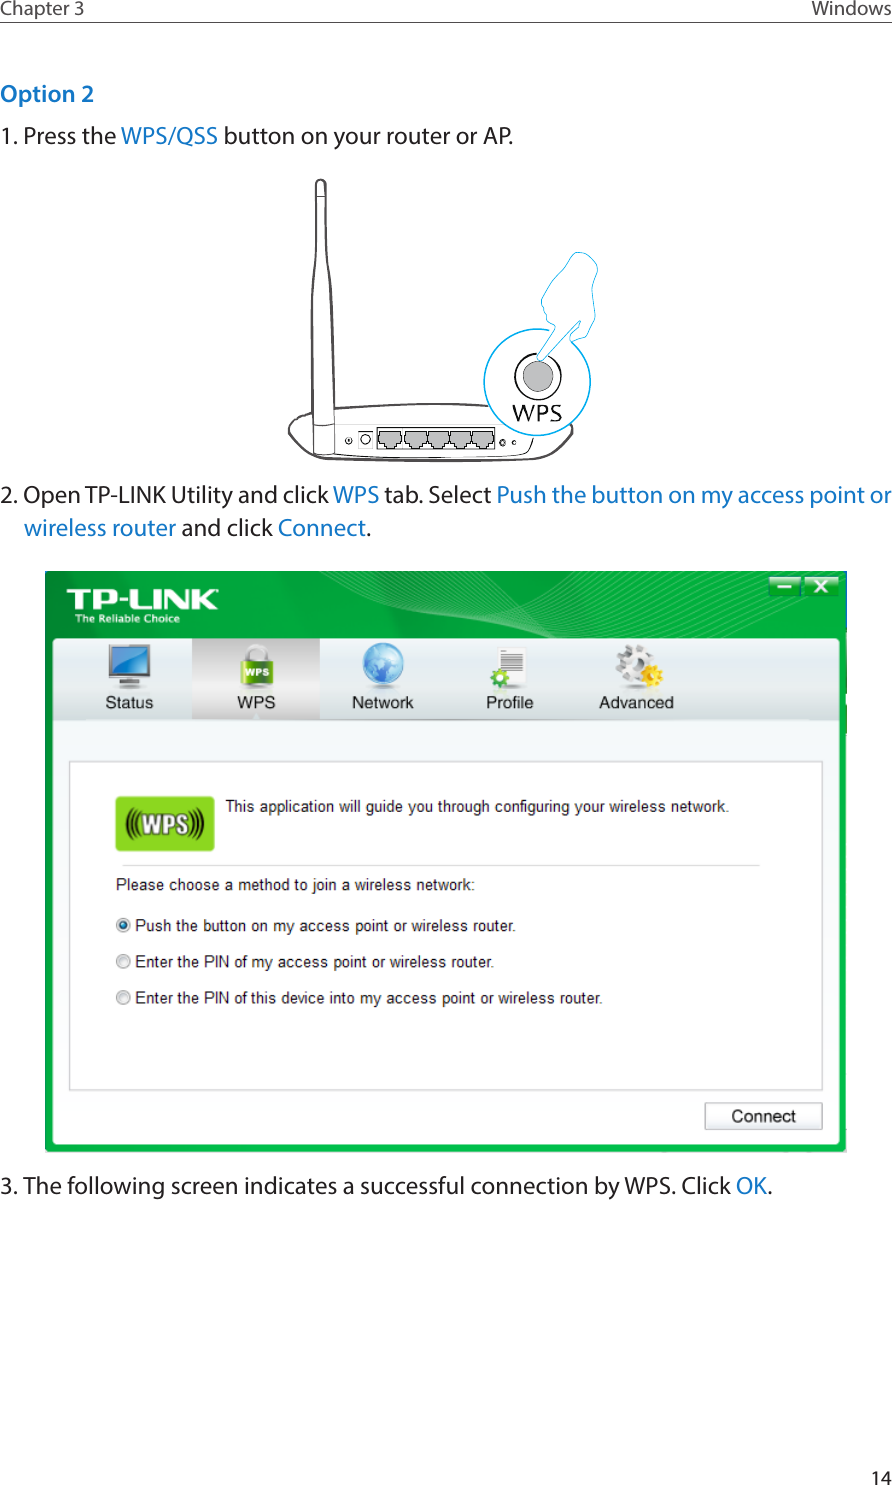 14Chapter 3 WindowsOption 21. Press the WPS/QSS button on your router or AP.2. Open TP-LINK Utility and click WPS tab. Select Push the button on my access point or wireless router and click Connect.3. The following screen indicates a successful connection by WPS. Click OK.